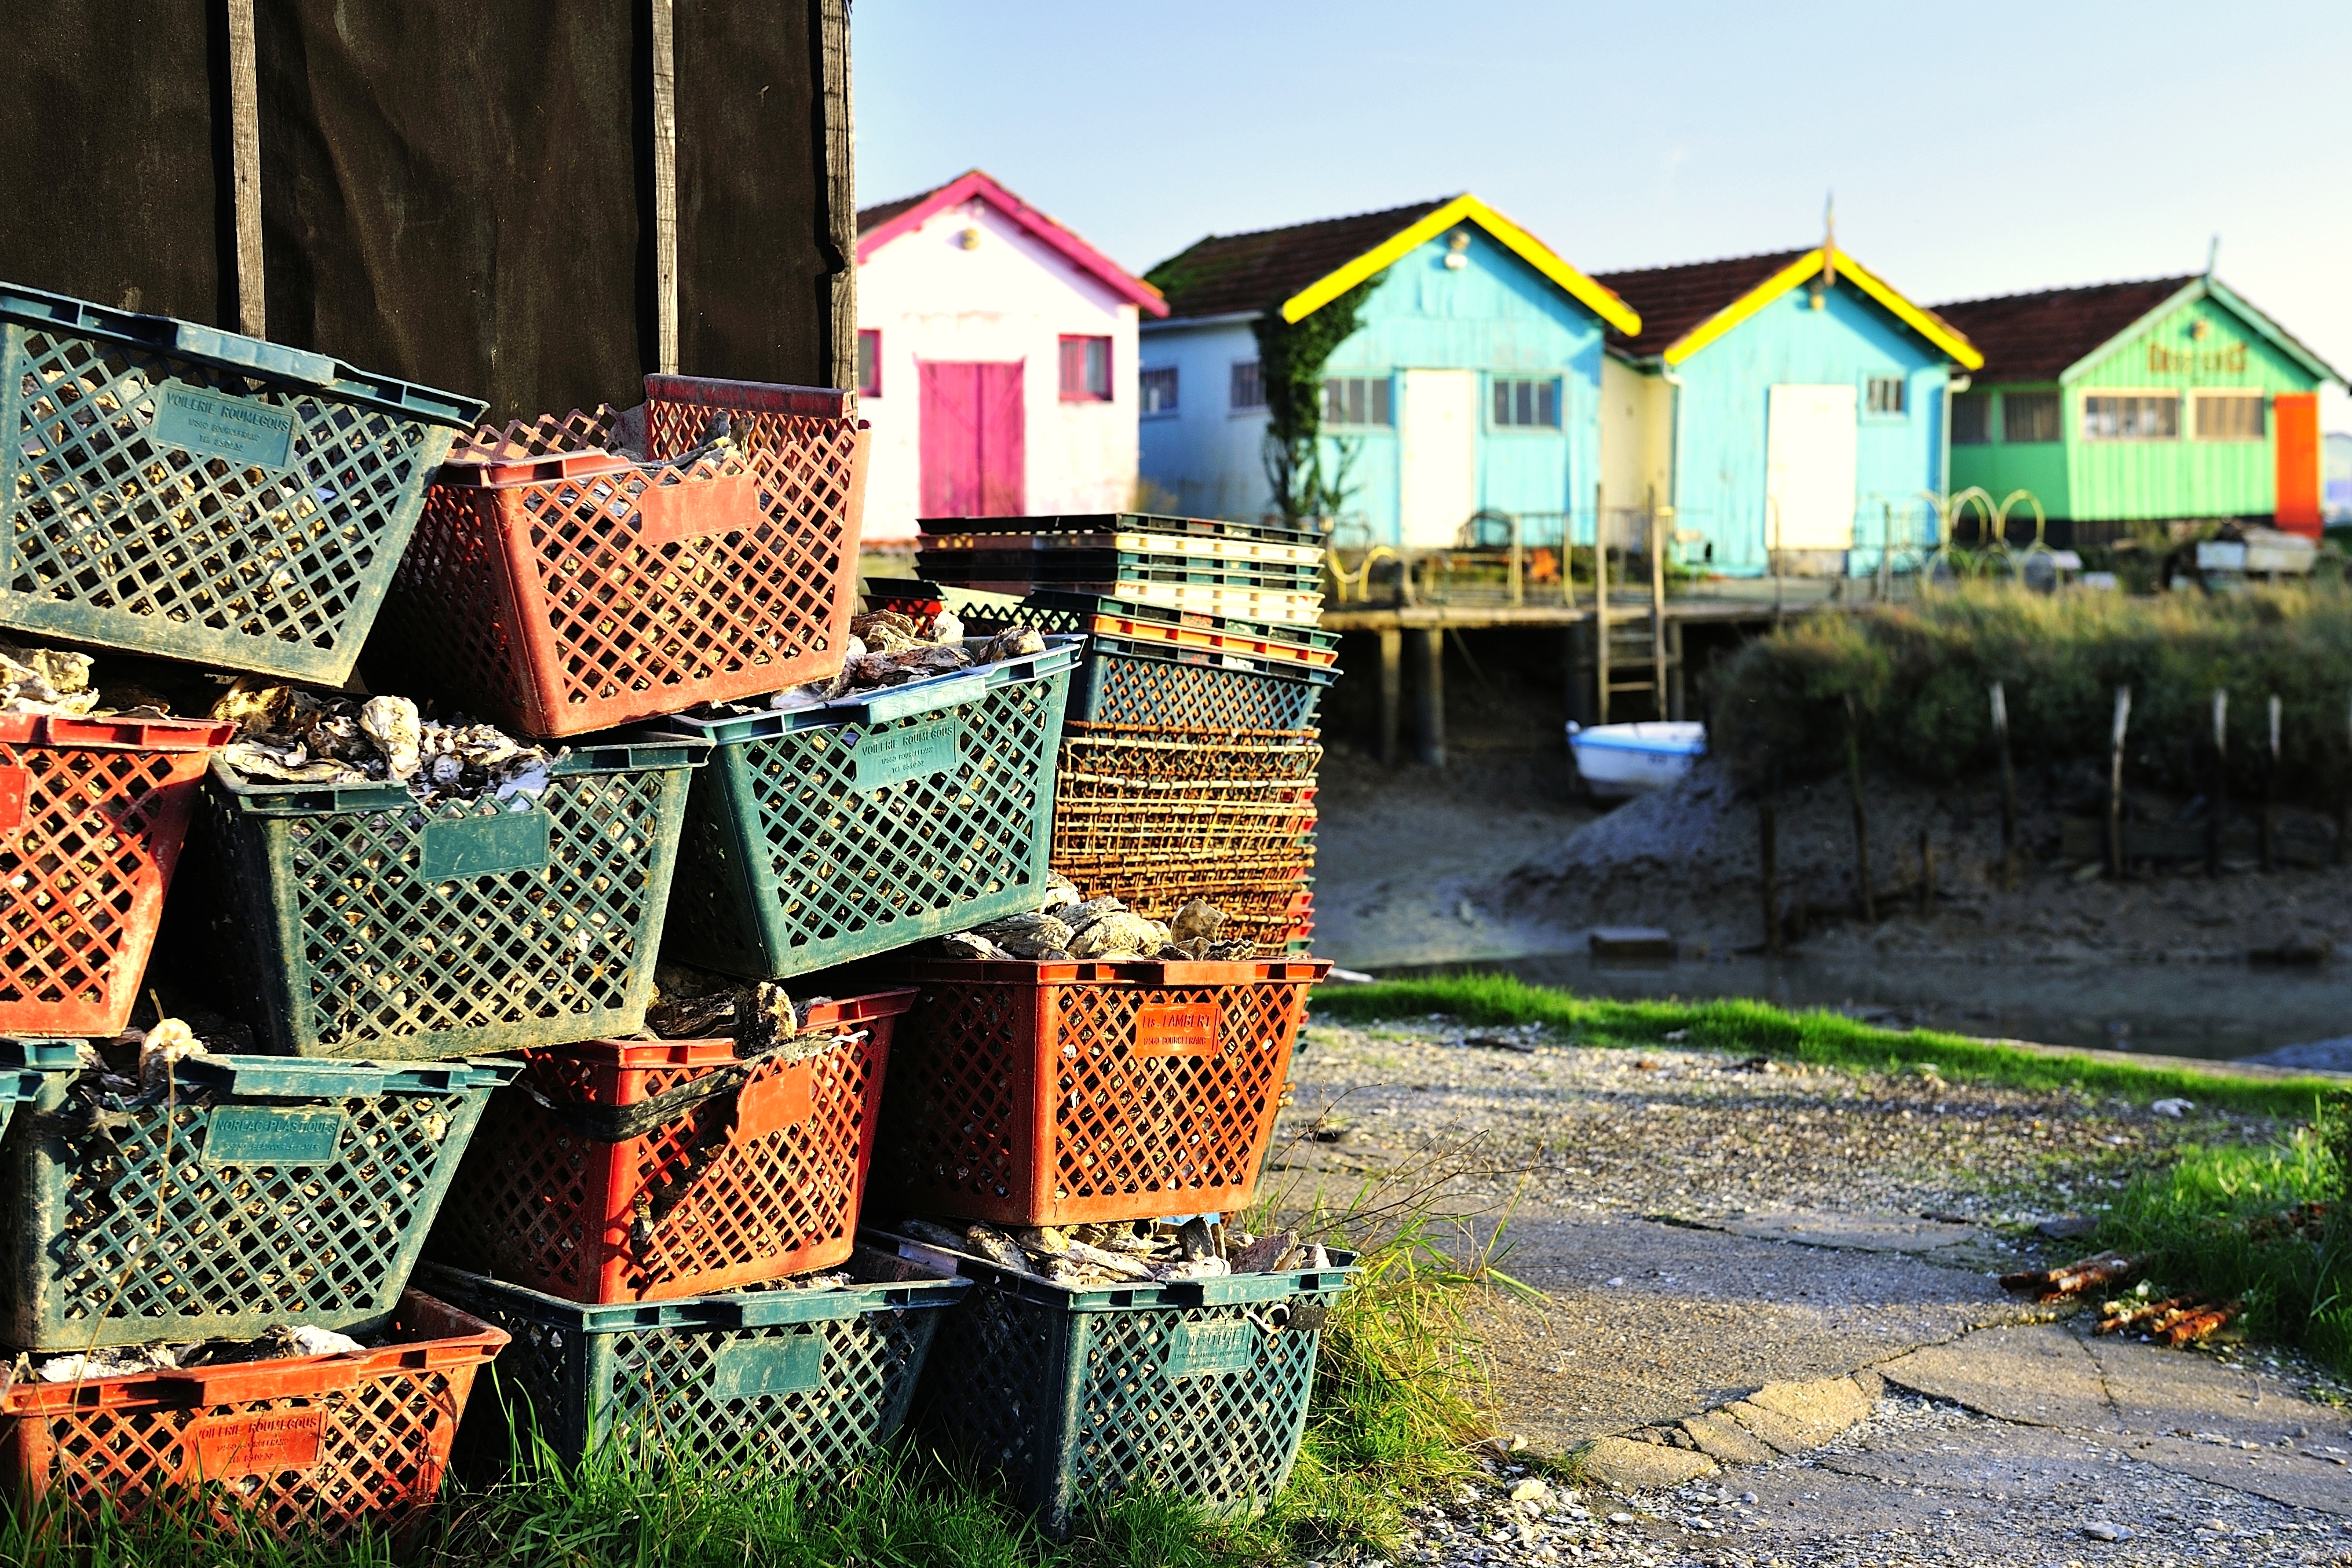 Colored cabins of Oleron